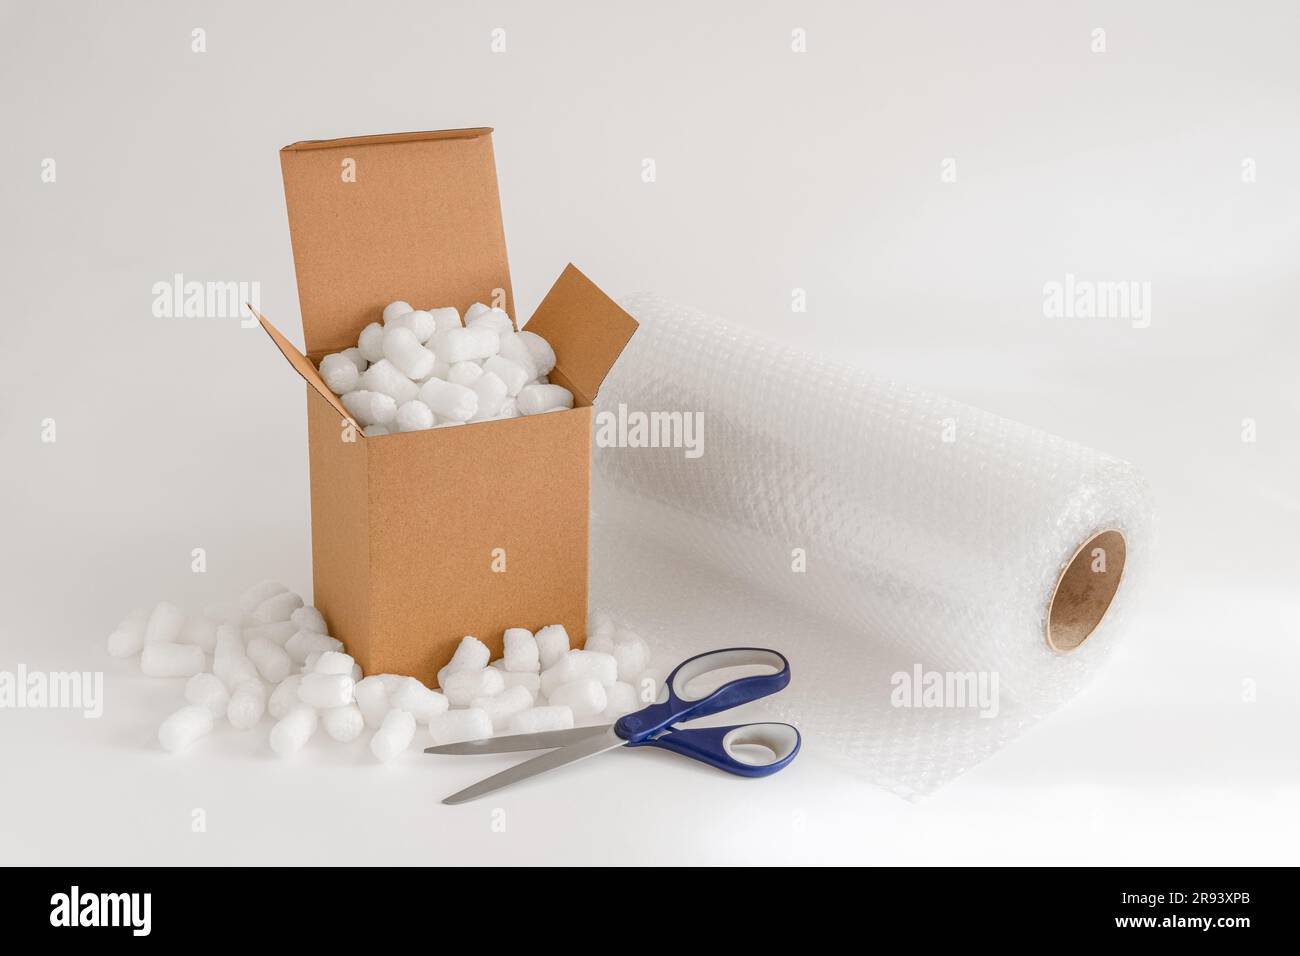 Cardboard box isolated on the white background filled with packing peanuts plus bubble wrap and scissors Stock Photo